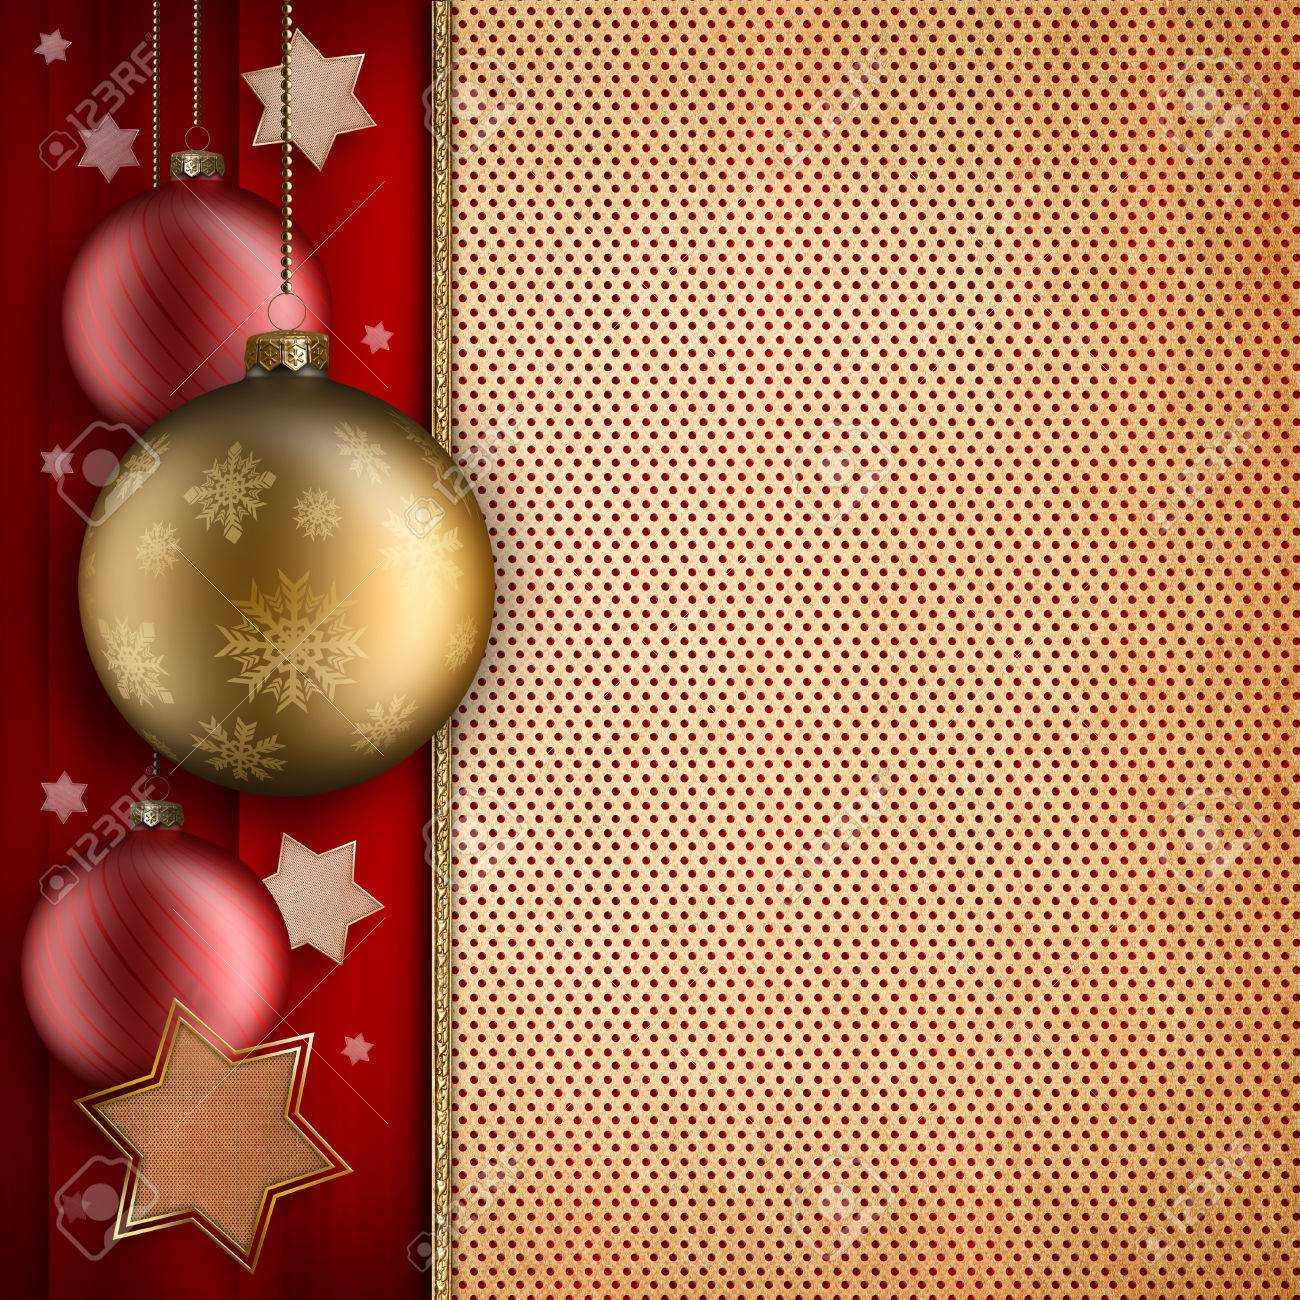 Christmas Card Template - Baulbles, Stars And Blank Space For.. Inside Blank Christmas Card Templates Free